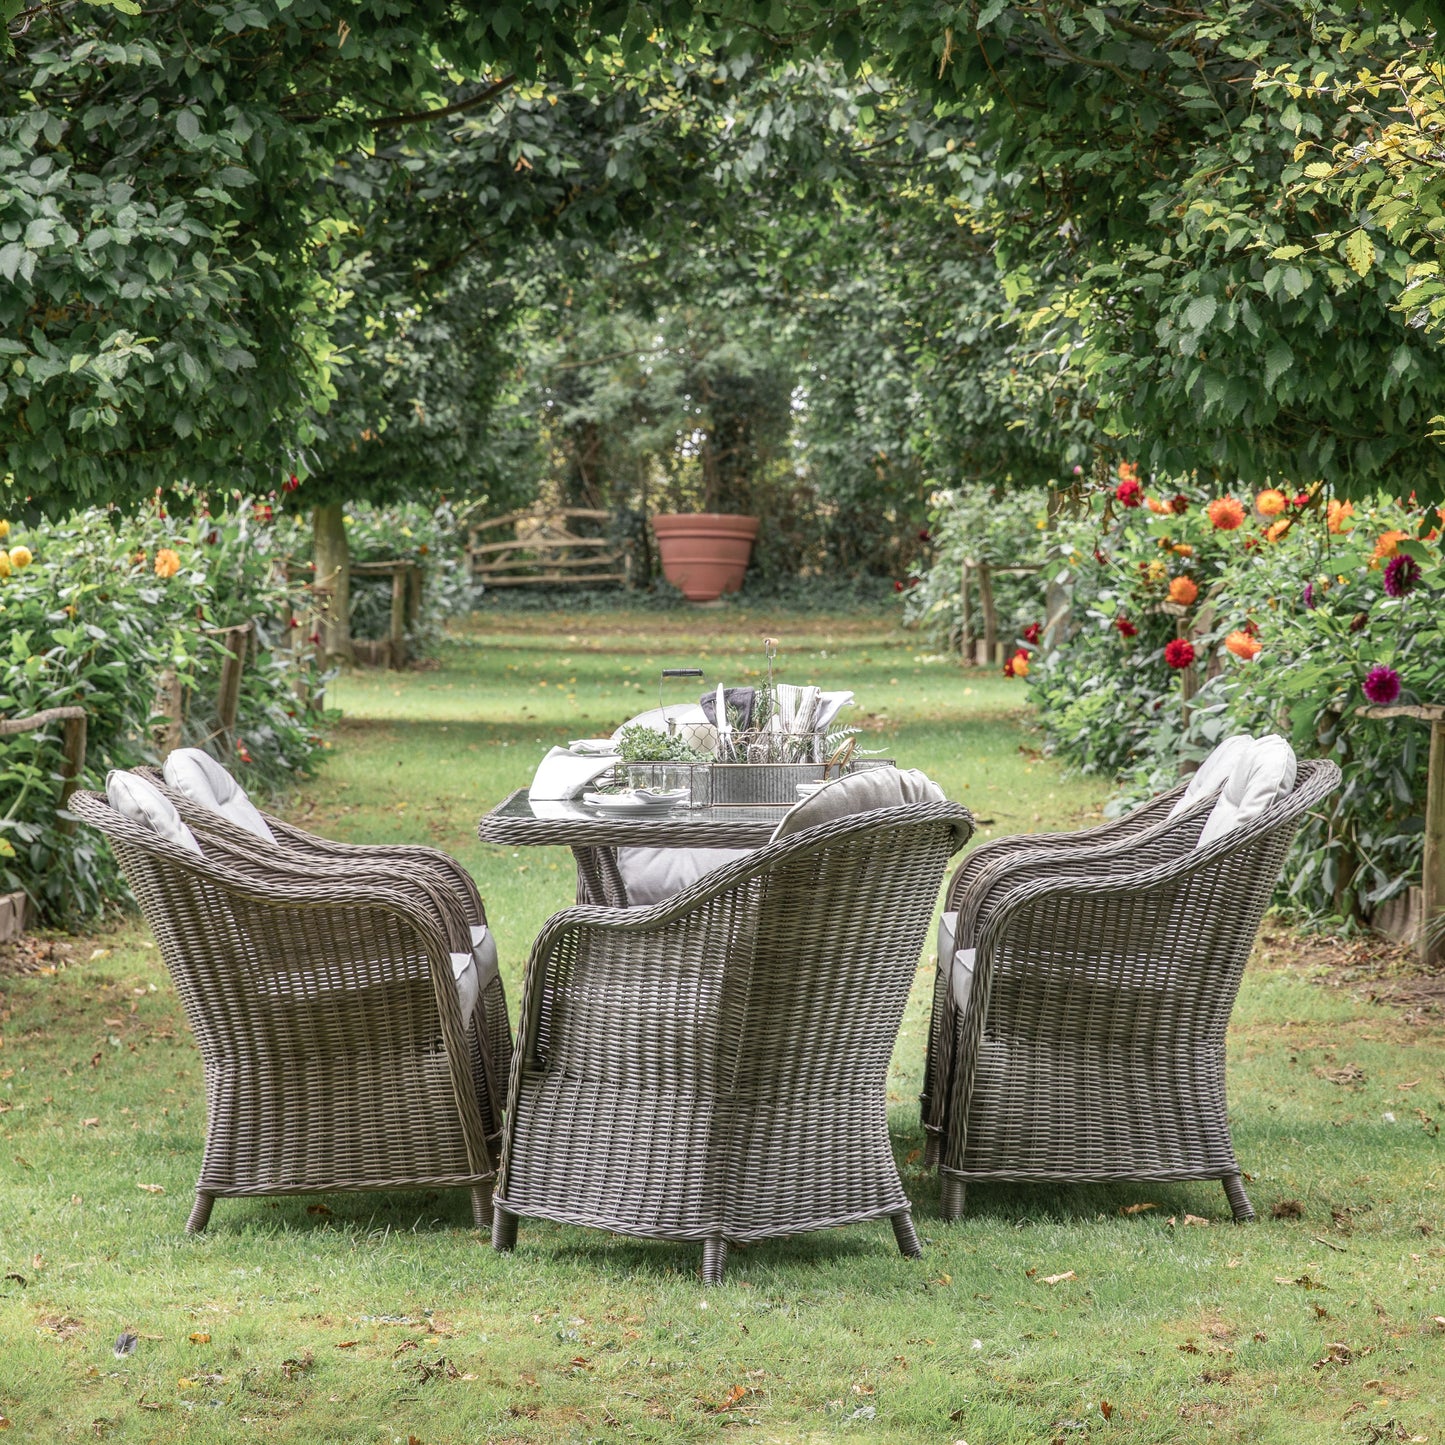 A Meavy 6 Seater Dining Set Natural by Kikiathome.co.uk enhancing the interior decor of a garden.